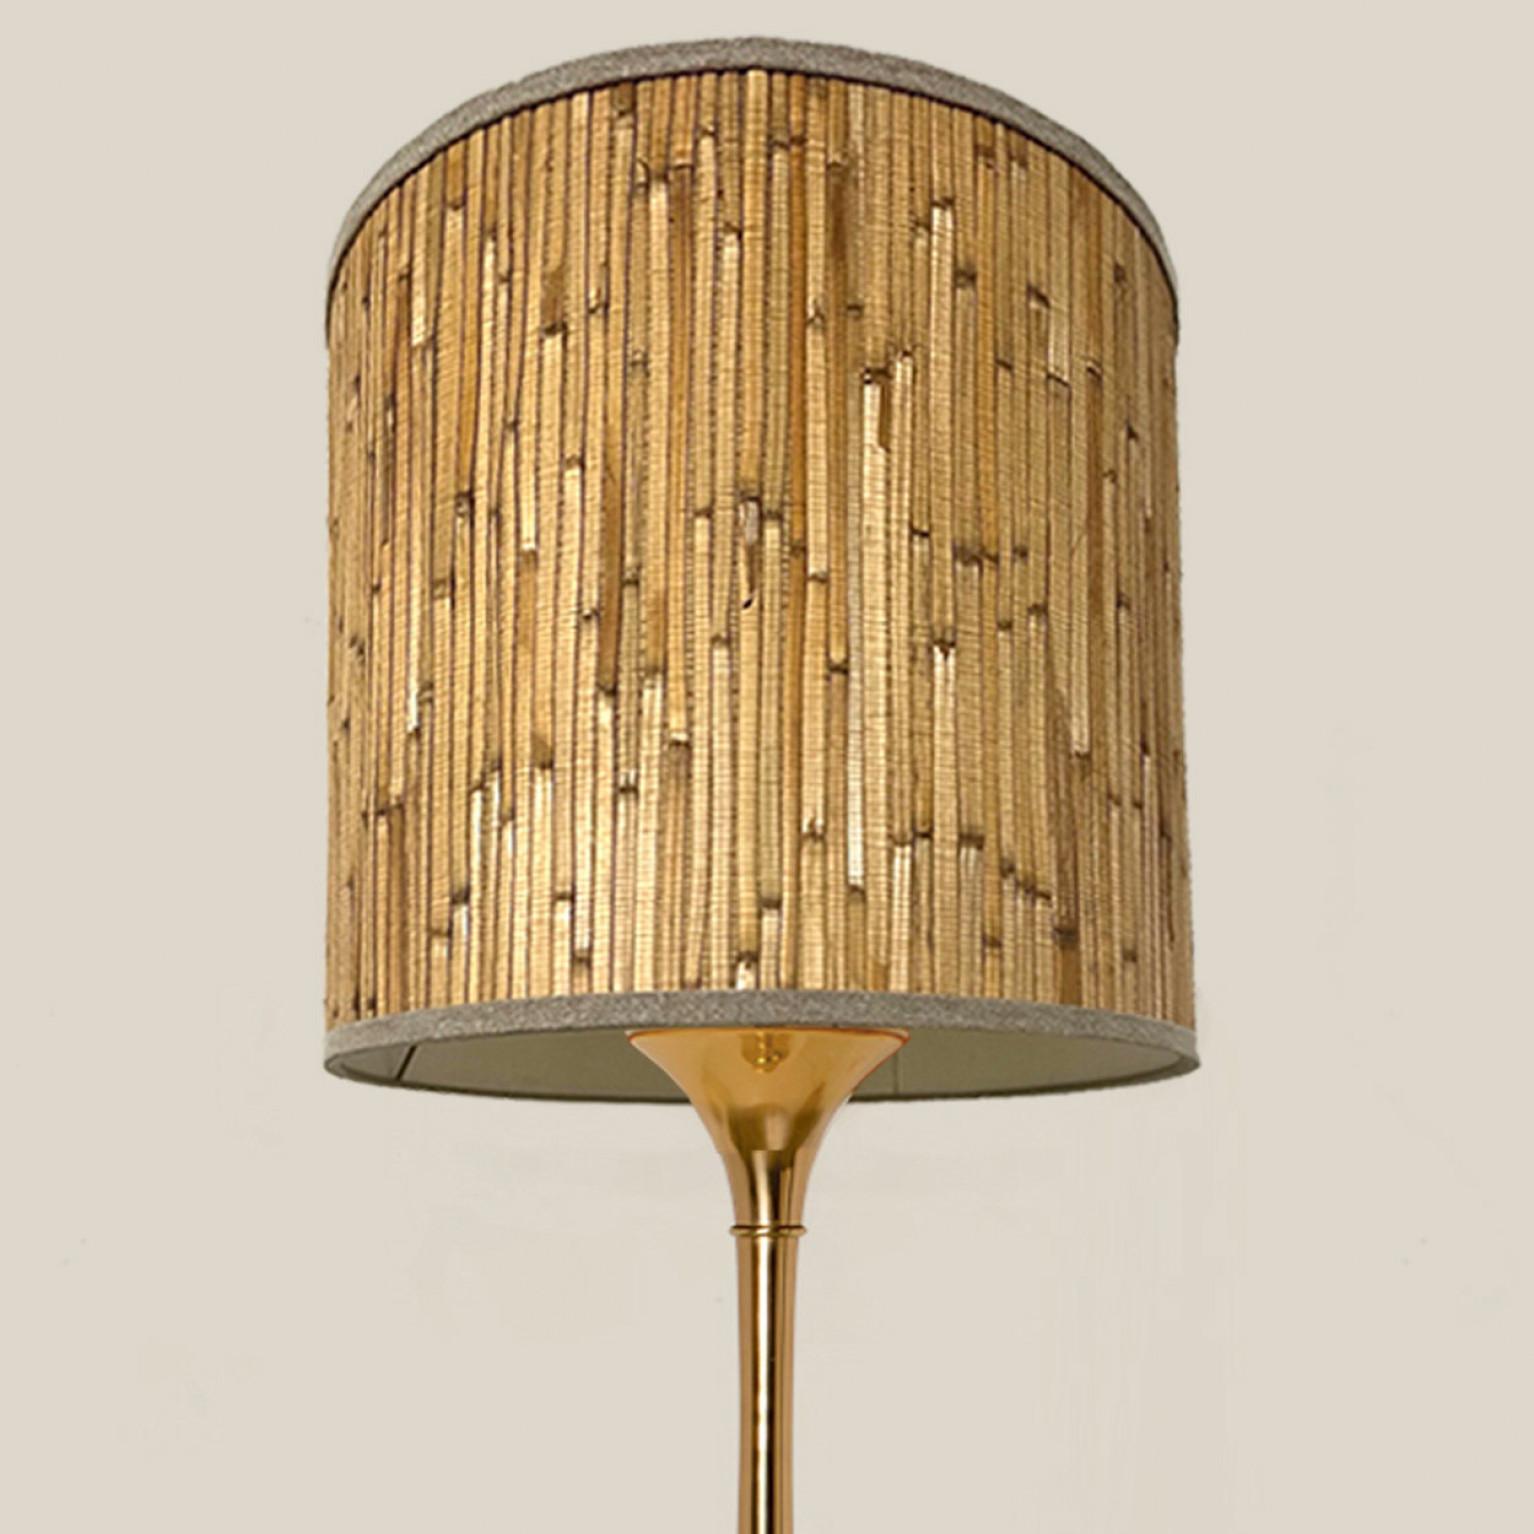 Pair of floor Lamps Gold Brass and Wood by Ingo Maurer, Europe, Germany, 1968 For Sale 10